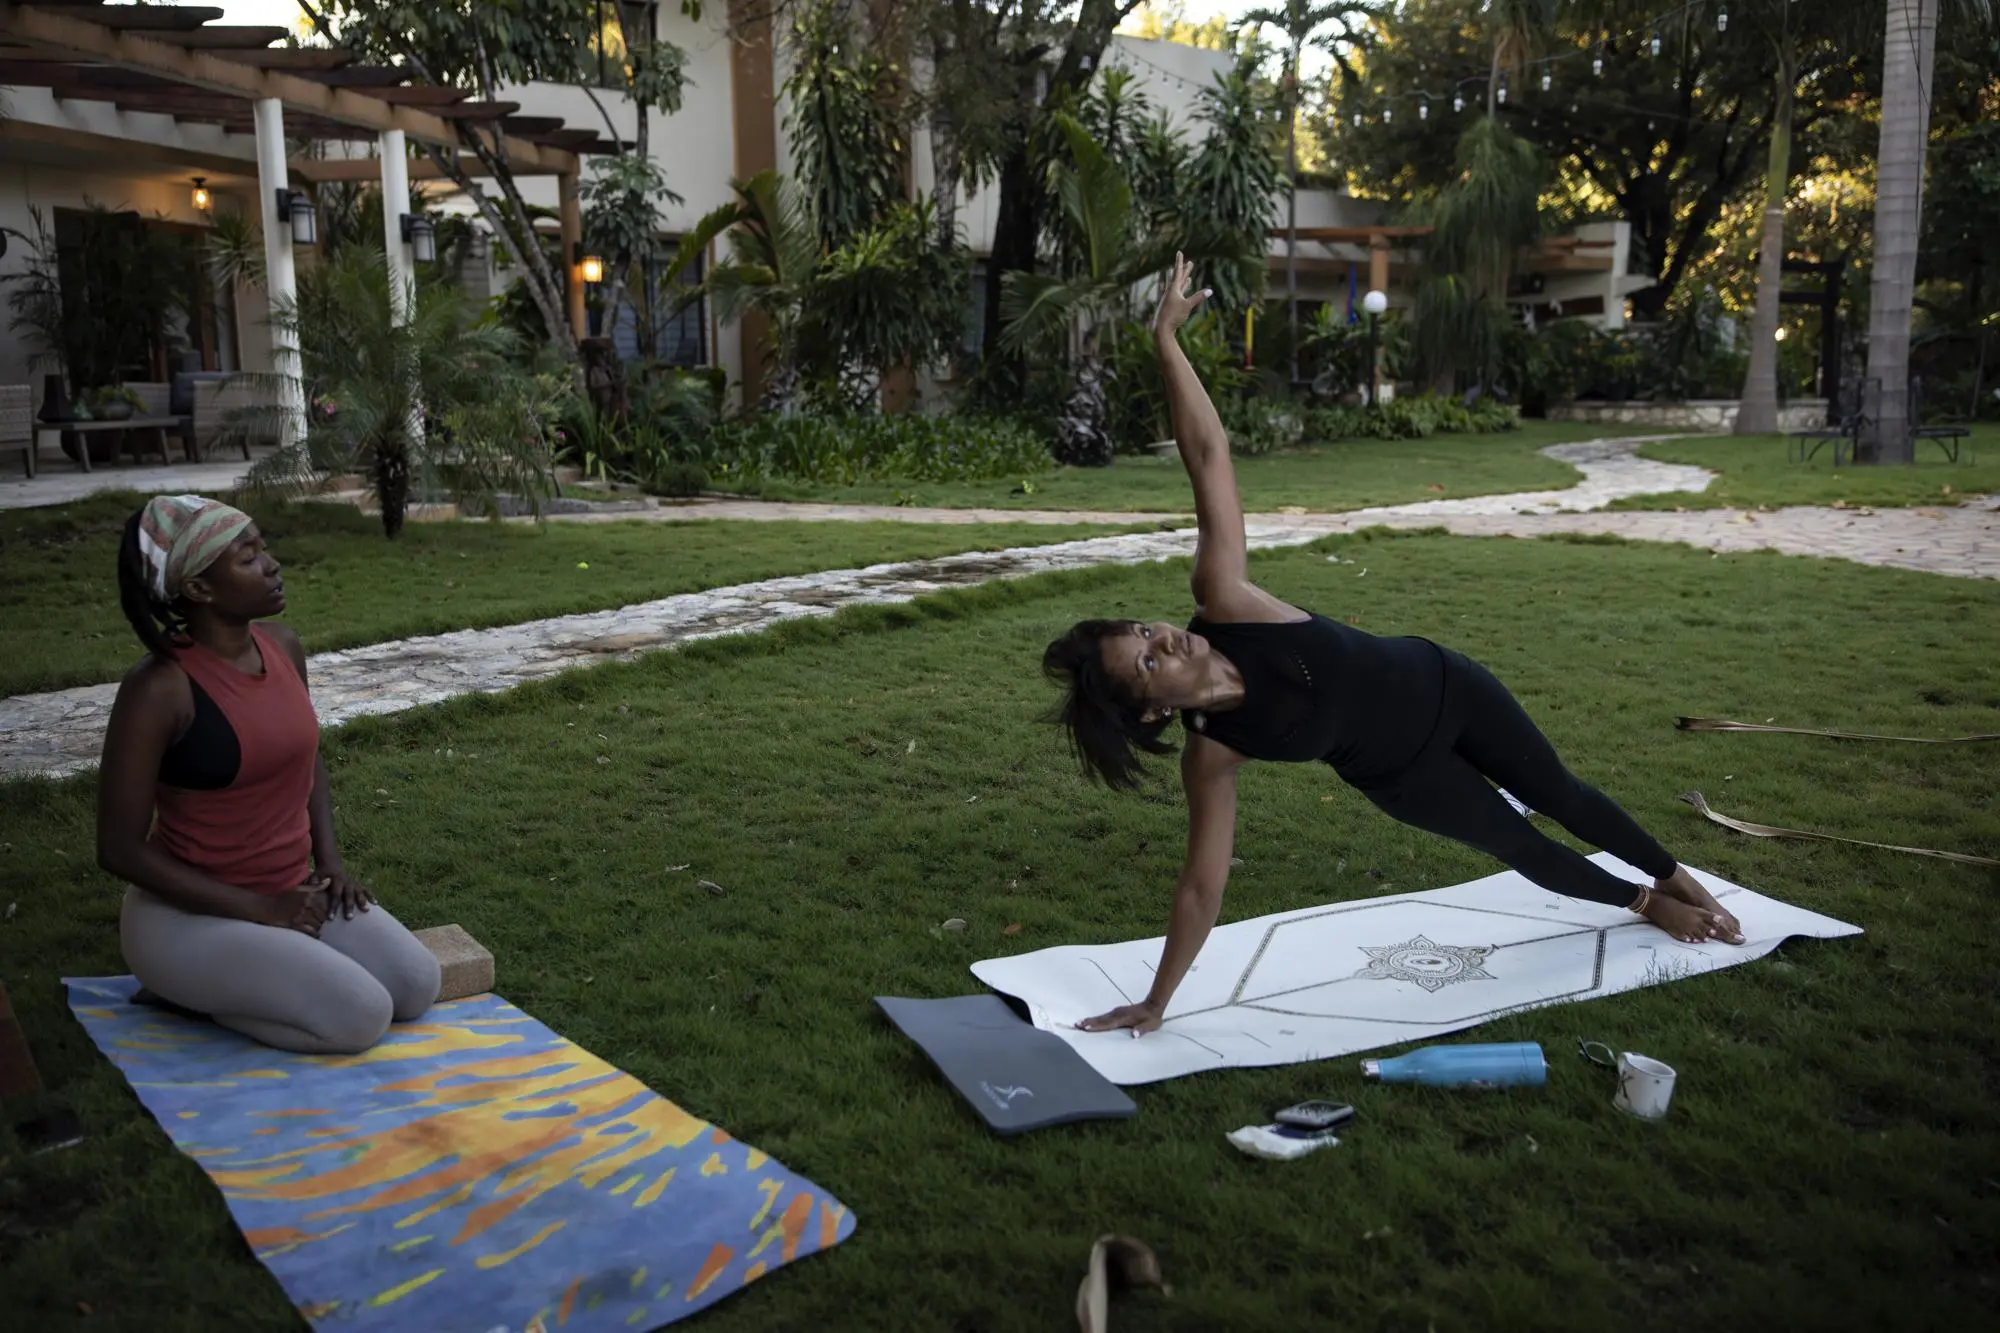 A businesswoman does yoga in her yard